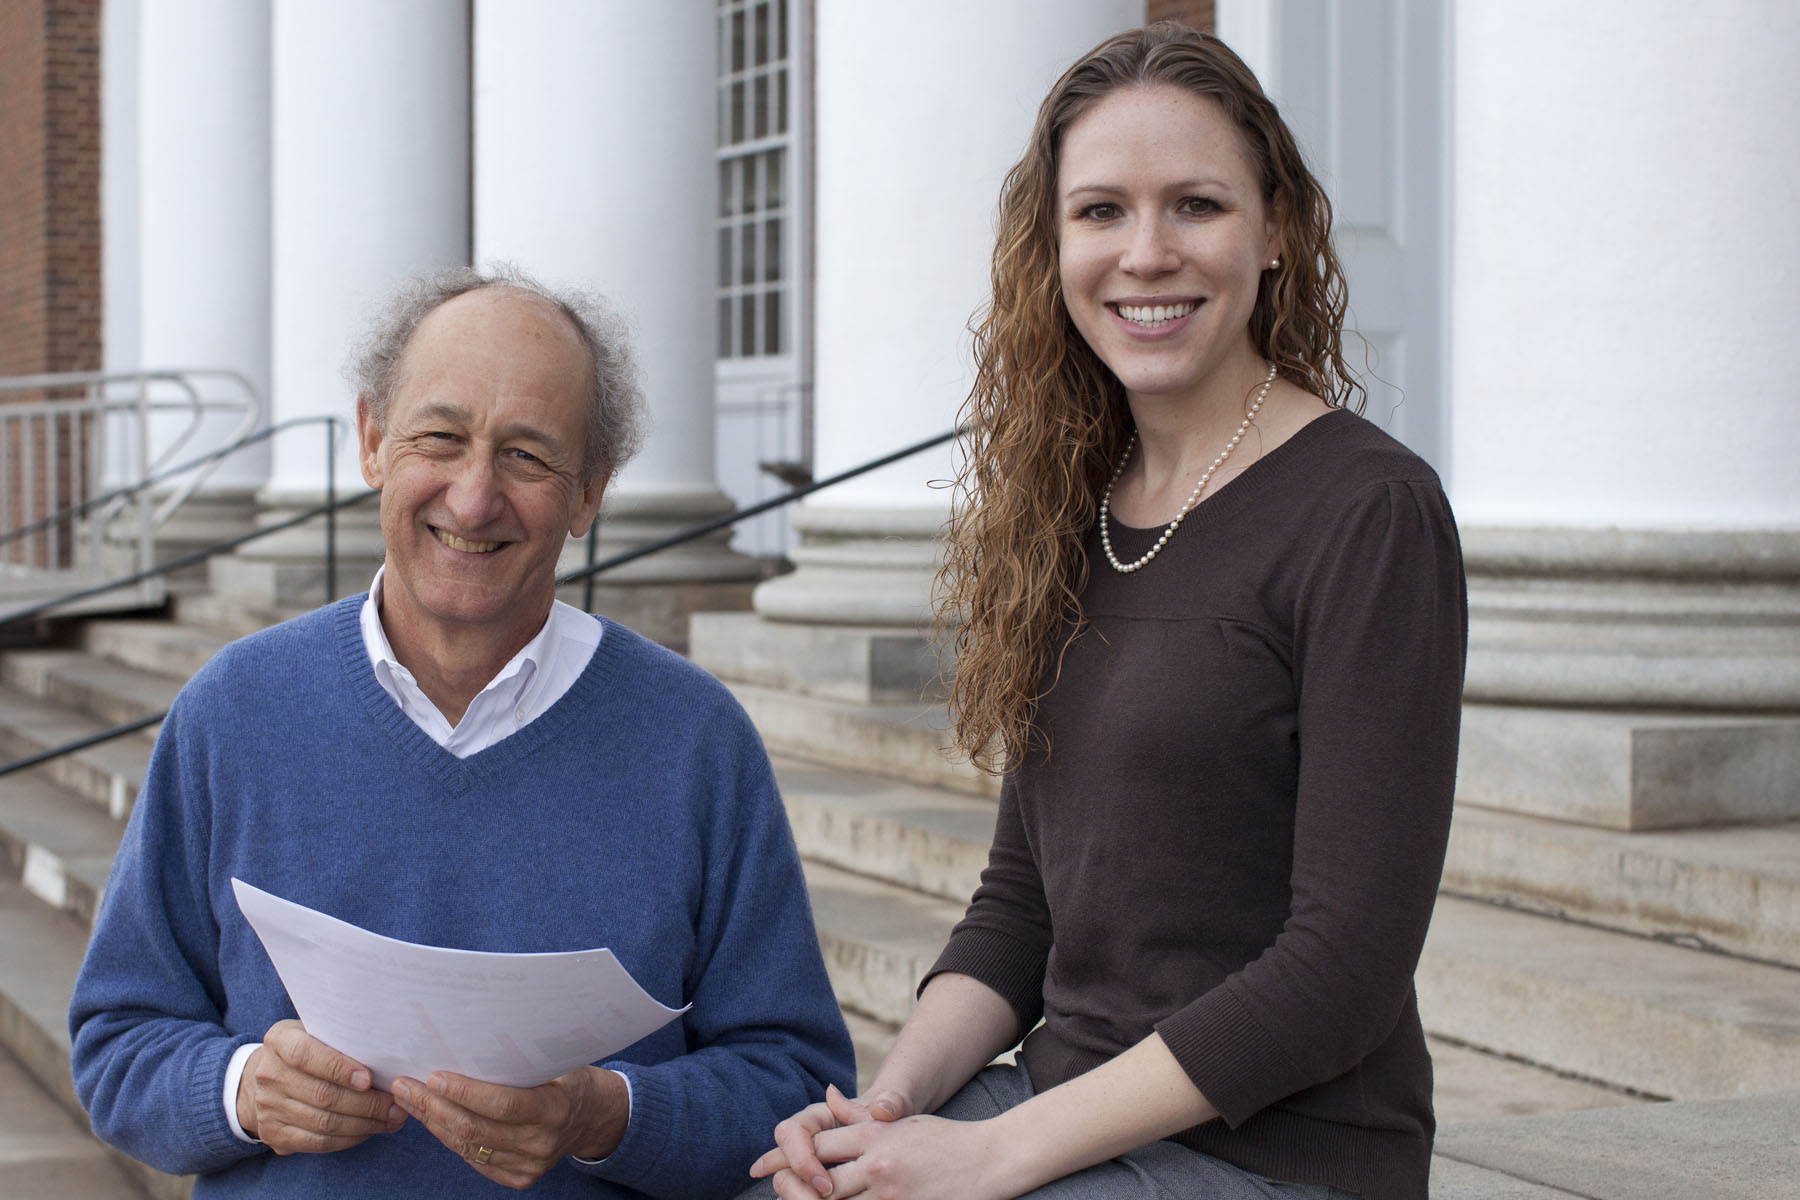 James Galloway and Allison Leach sitting on a buildings steps smiling at the camera